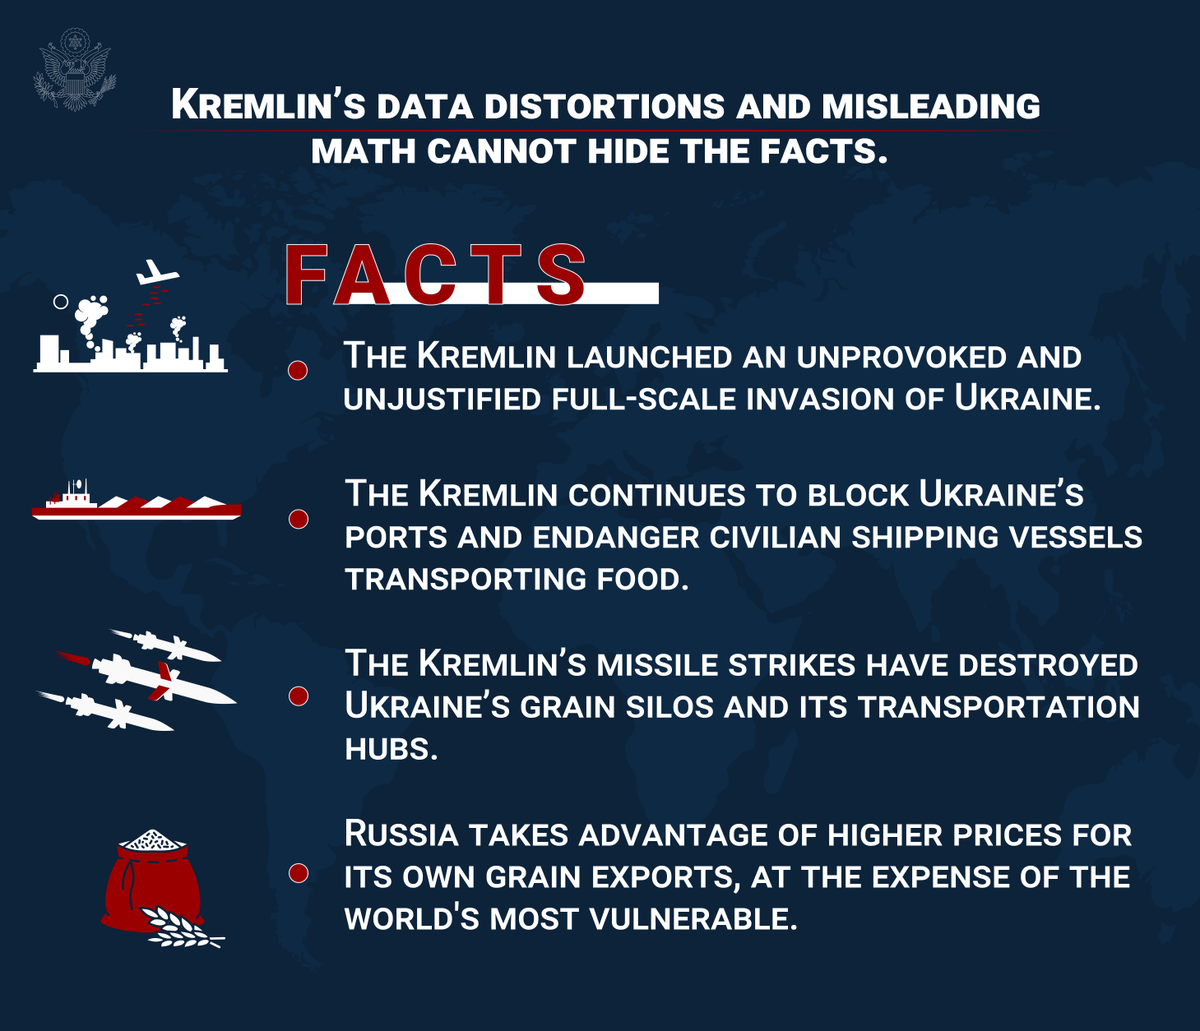 The Kremlin’s data distortions and misleading math surrounding the #BSGI cannot hide the facts.